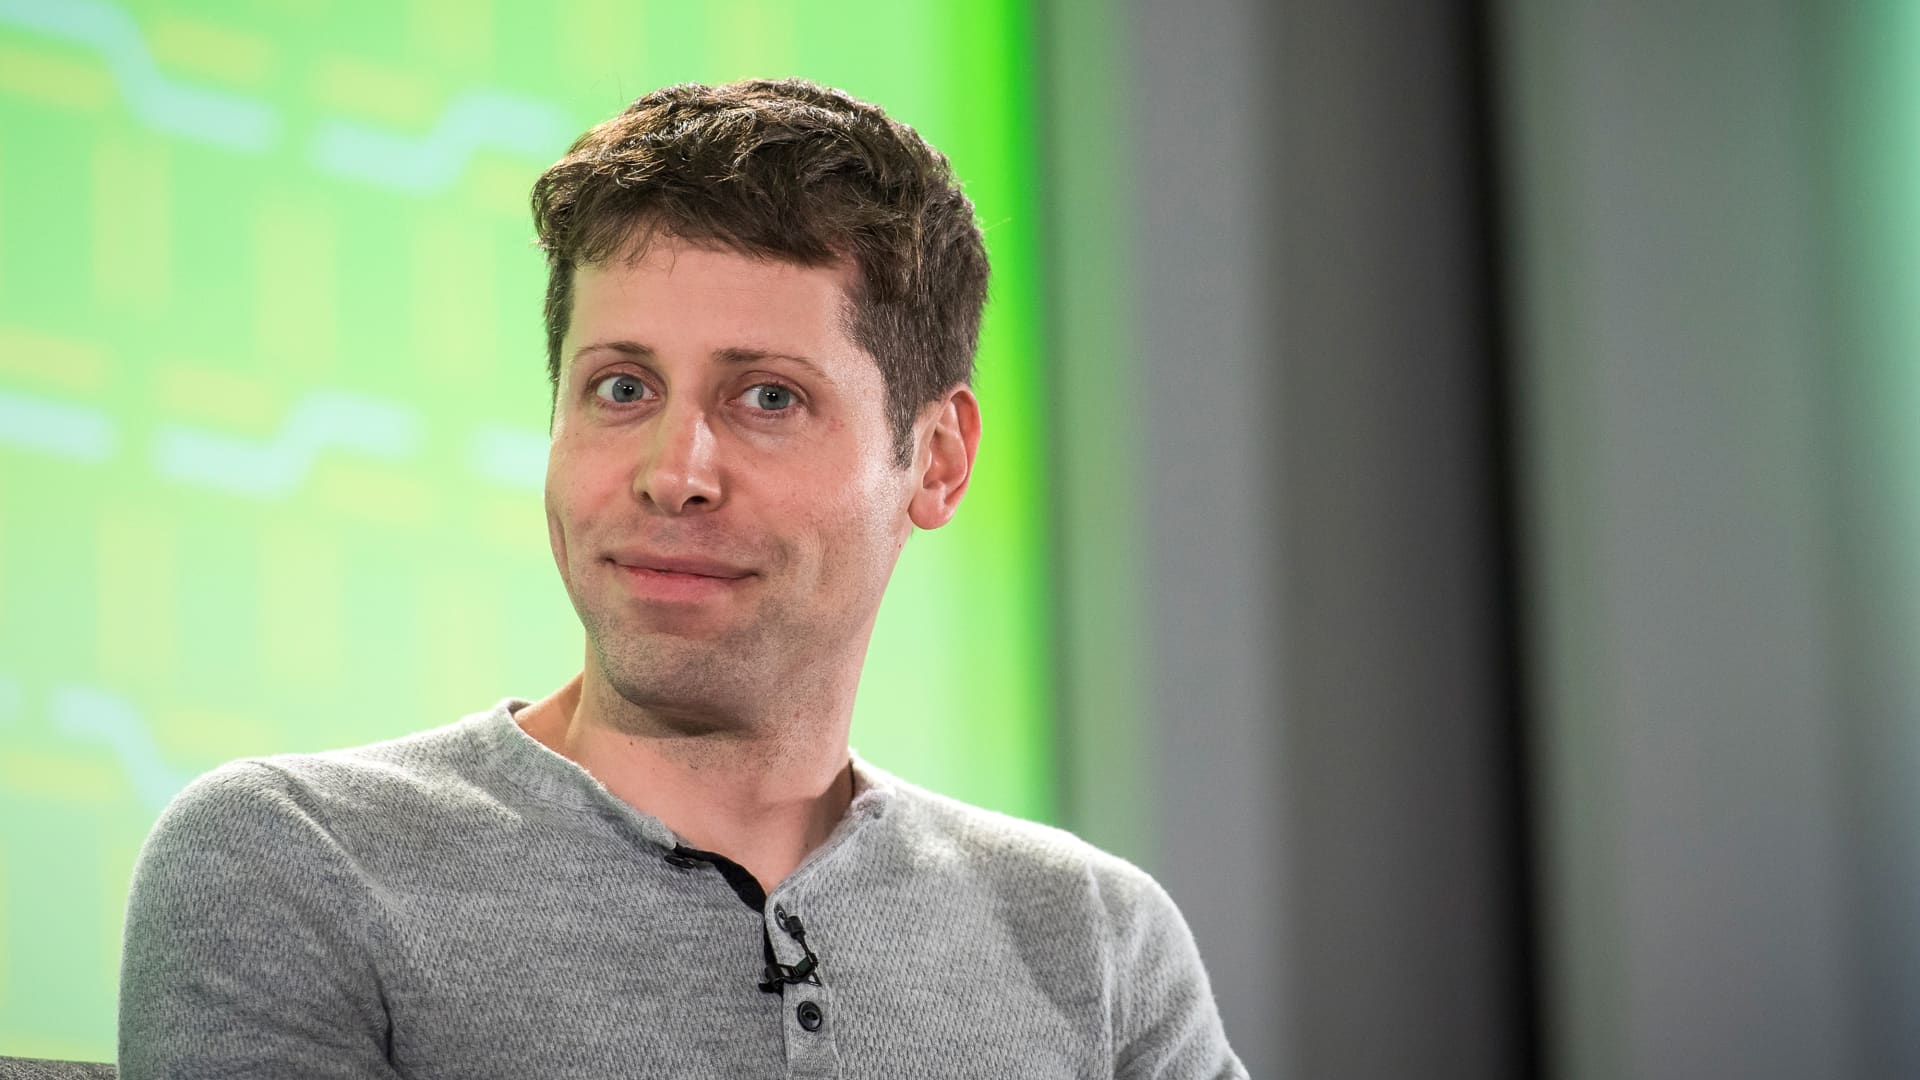 Sam Altman did not just take any equity in OpenAI, report suggests